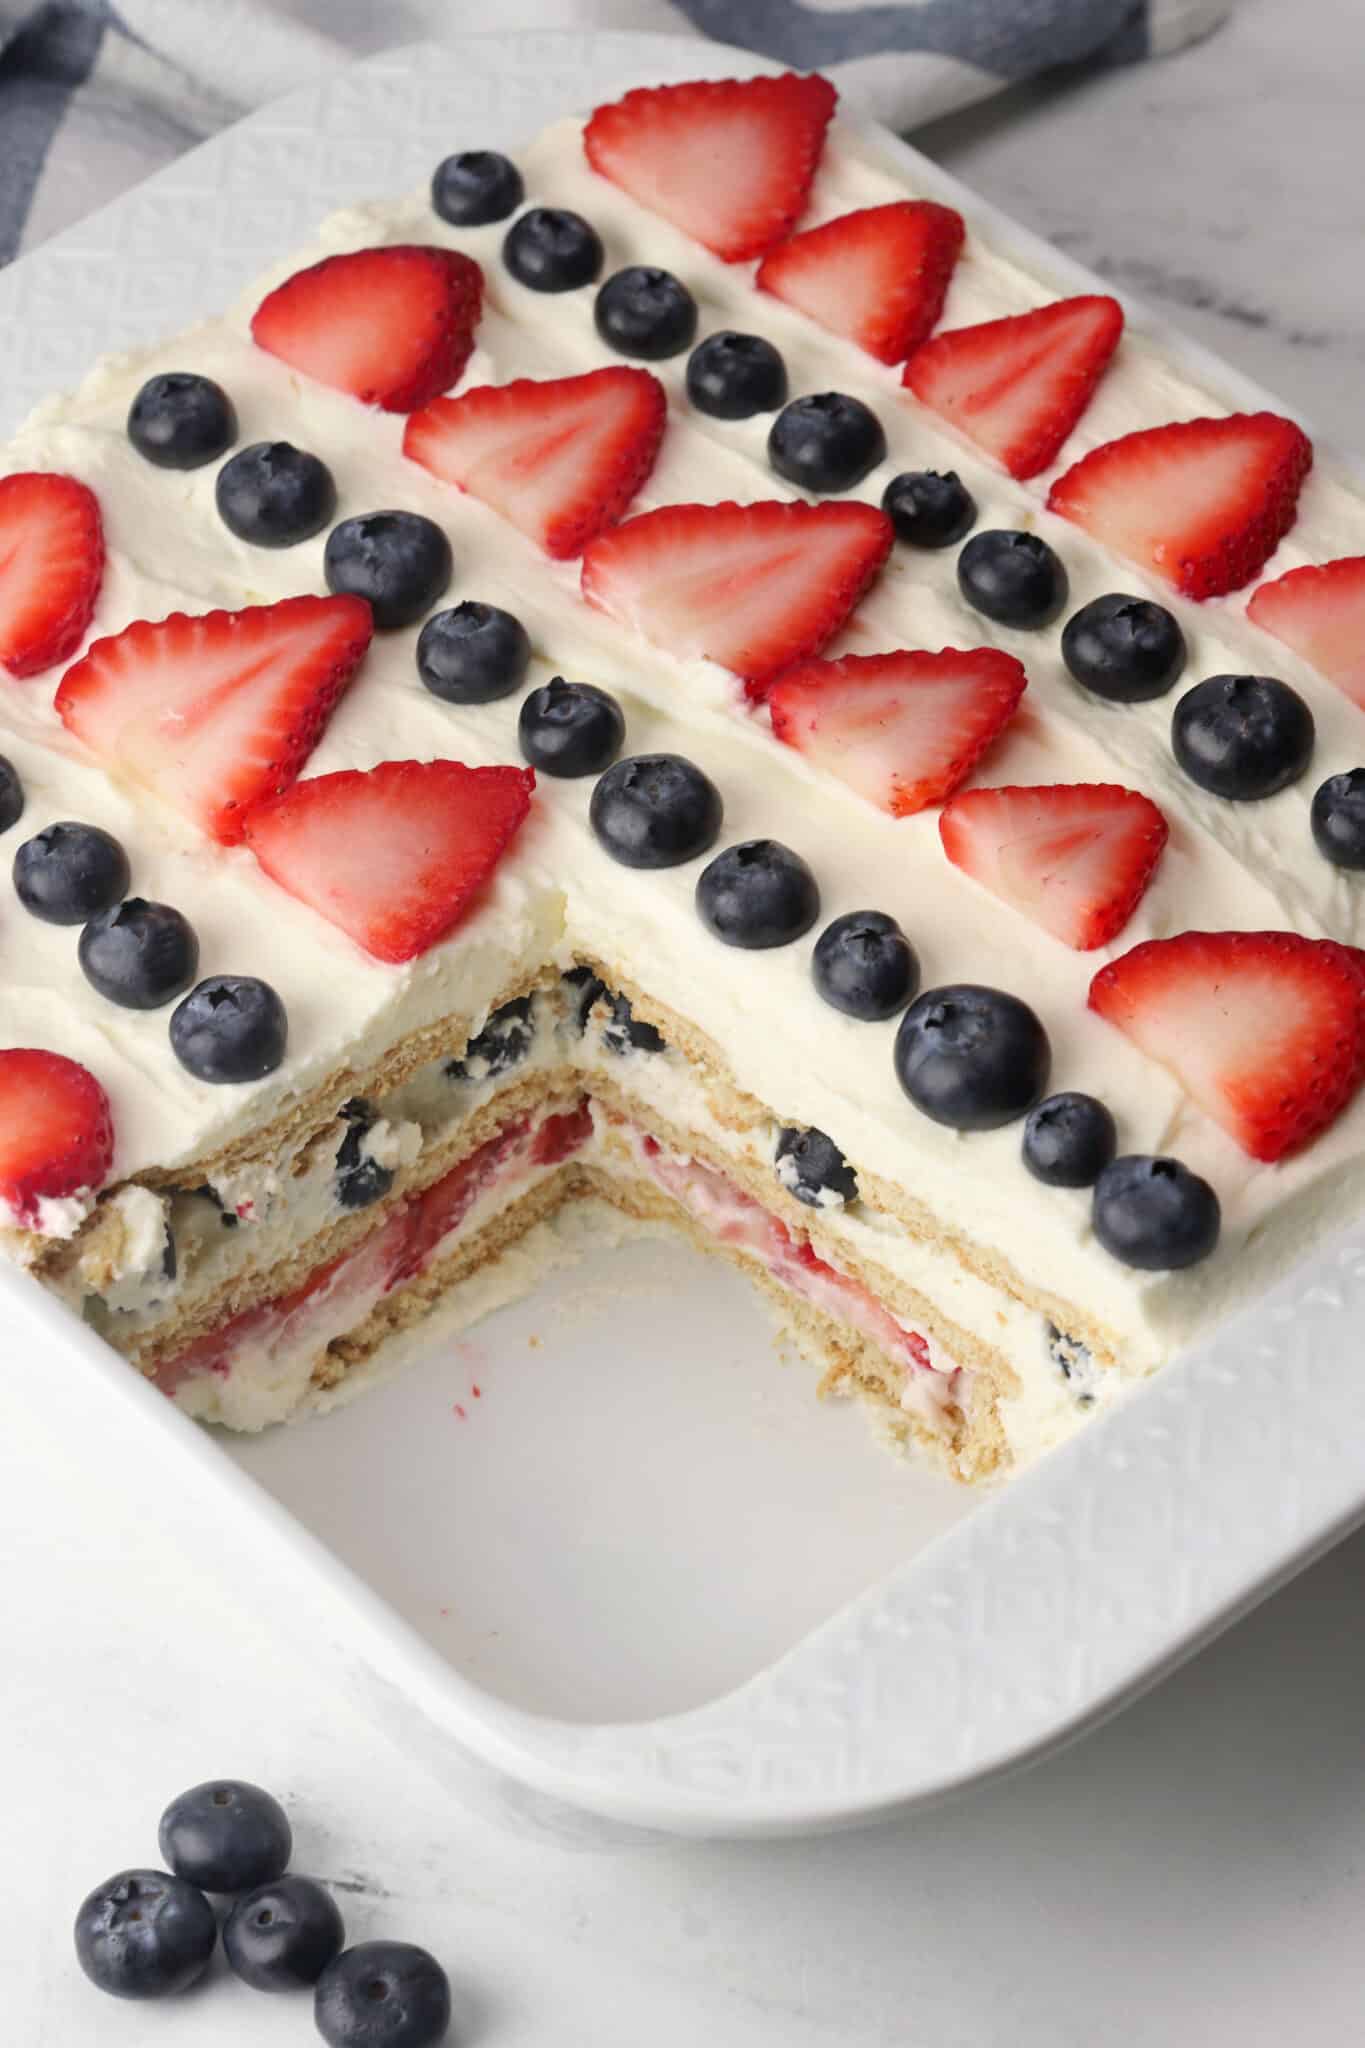 An icebox cake in a casserole dish that's topped with berries with a piece missing.